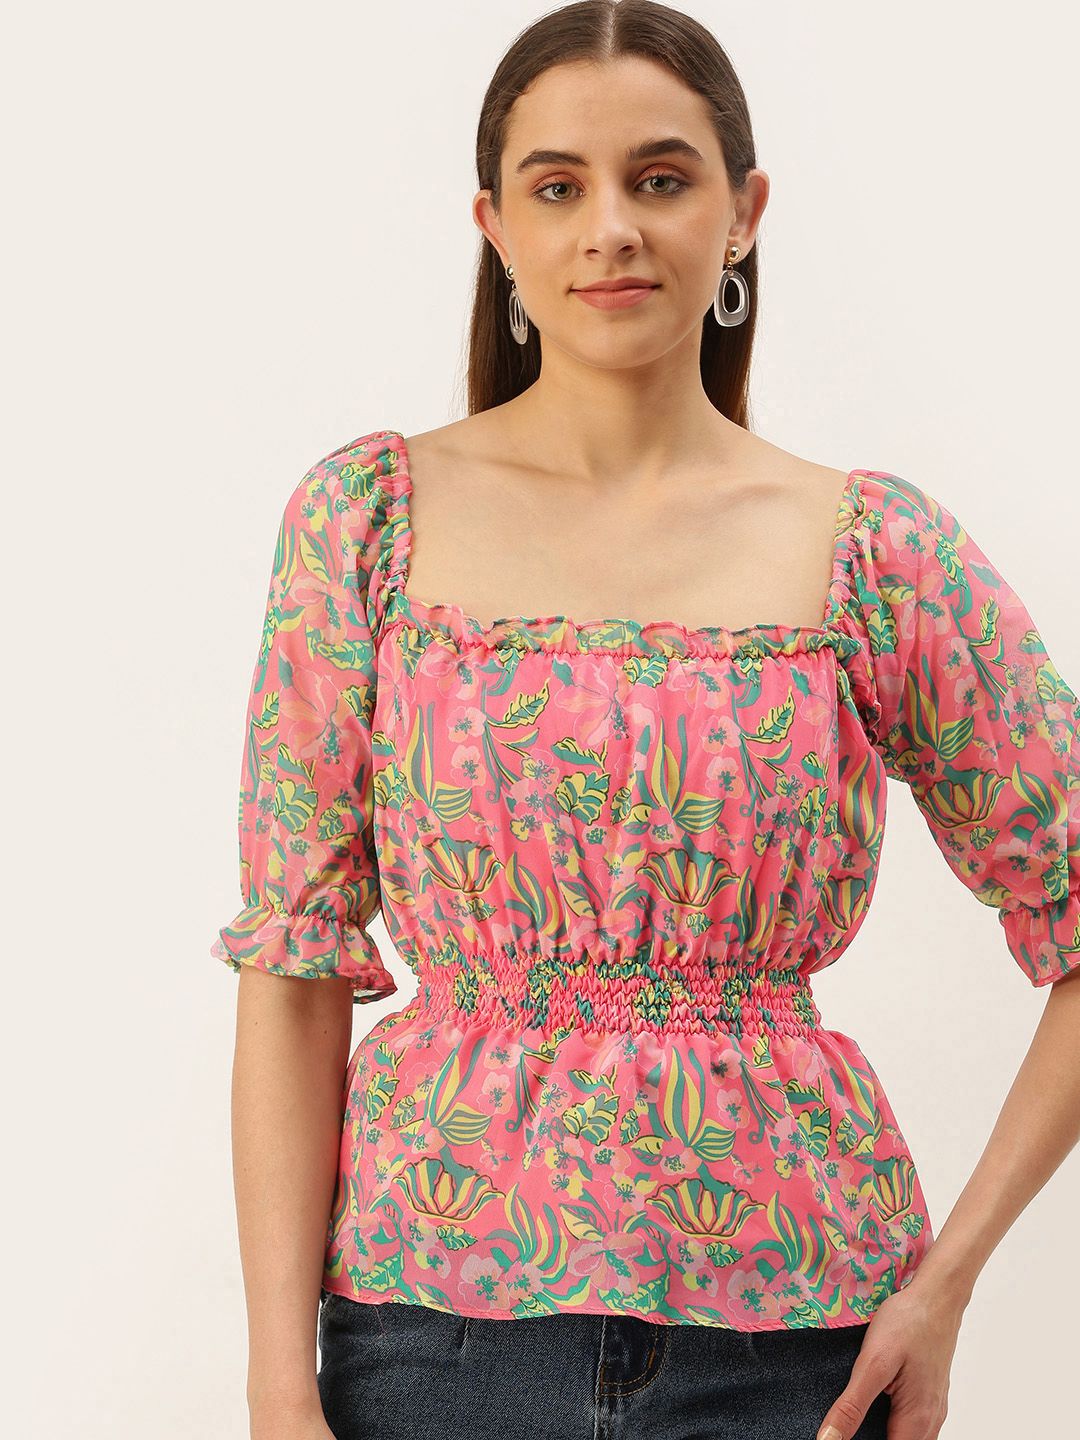 MELOSO Pink & Sea Green Floral Print Georgette Cinched Waist Top Price in India